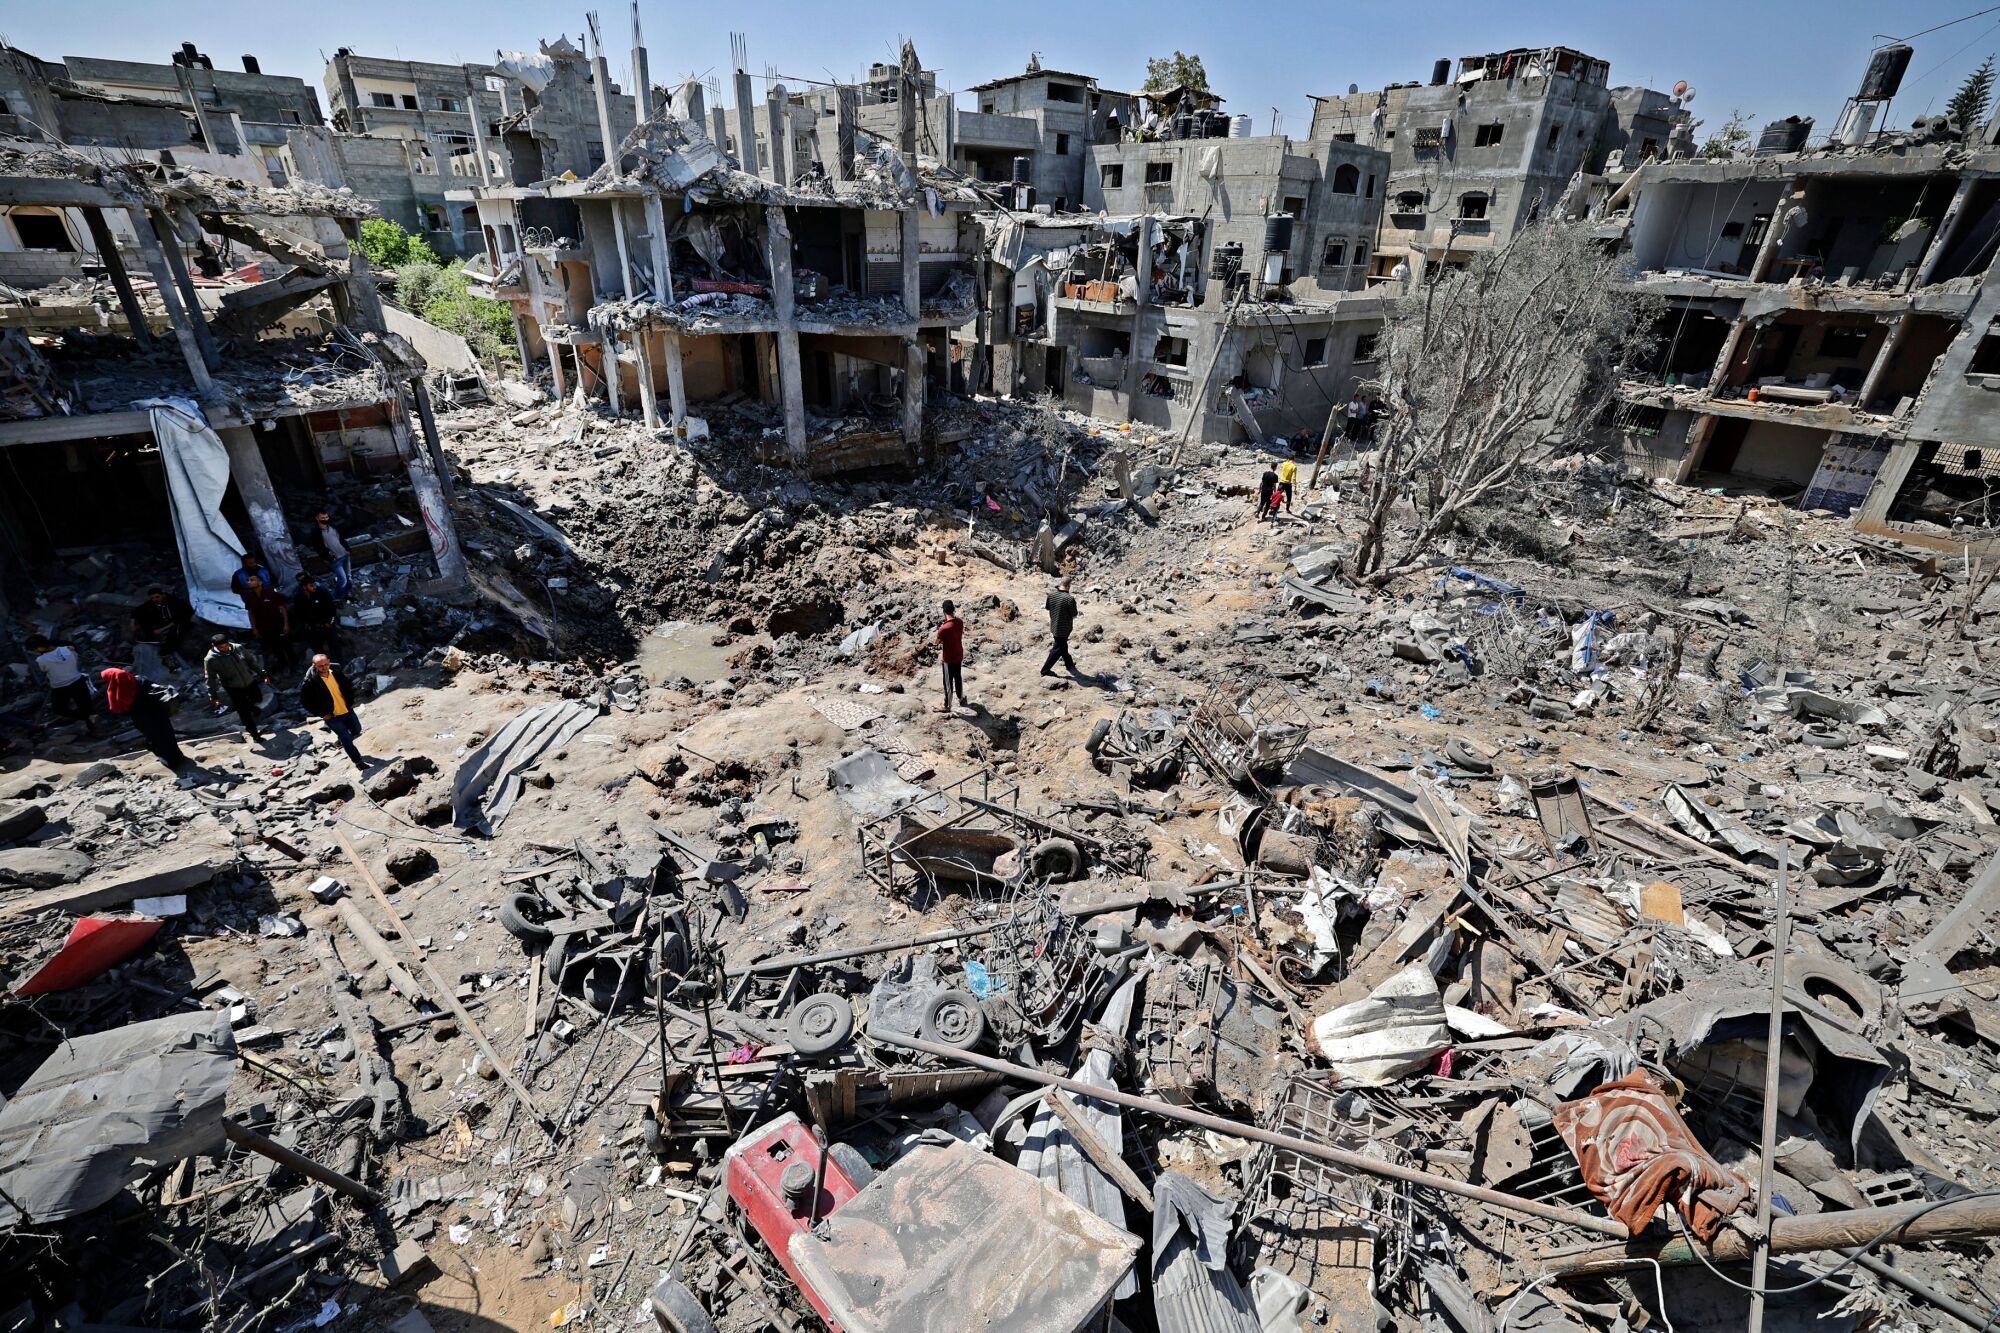 A few people walk amid the rubble of flattened and severely damaged buildings.